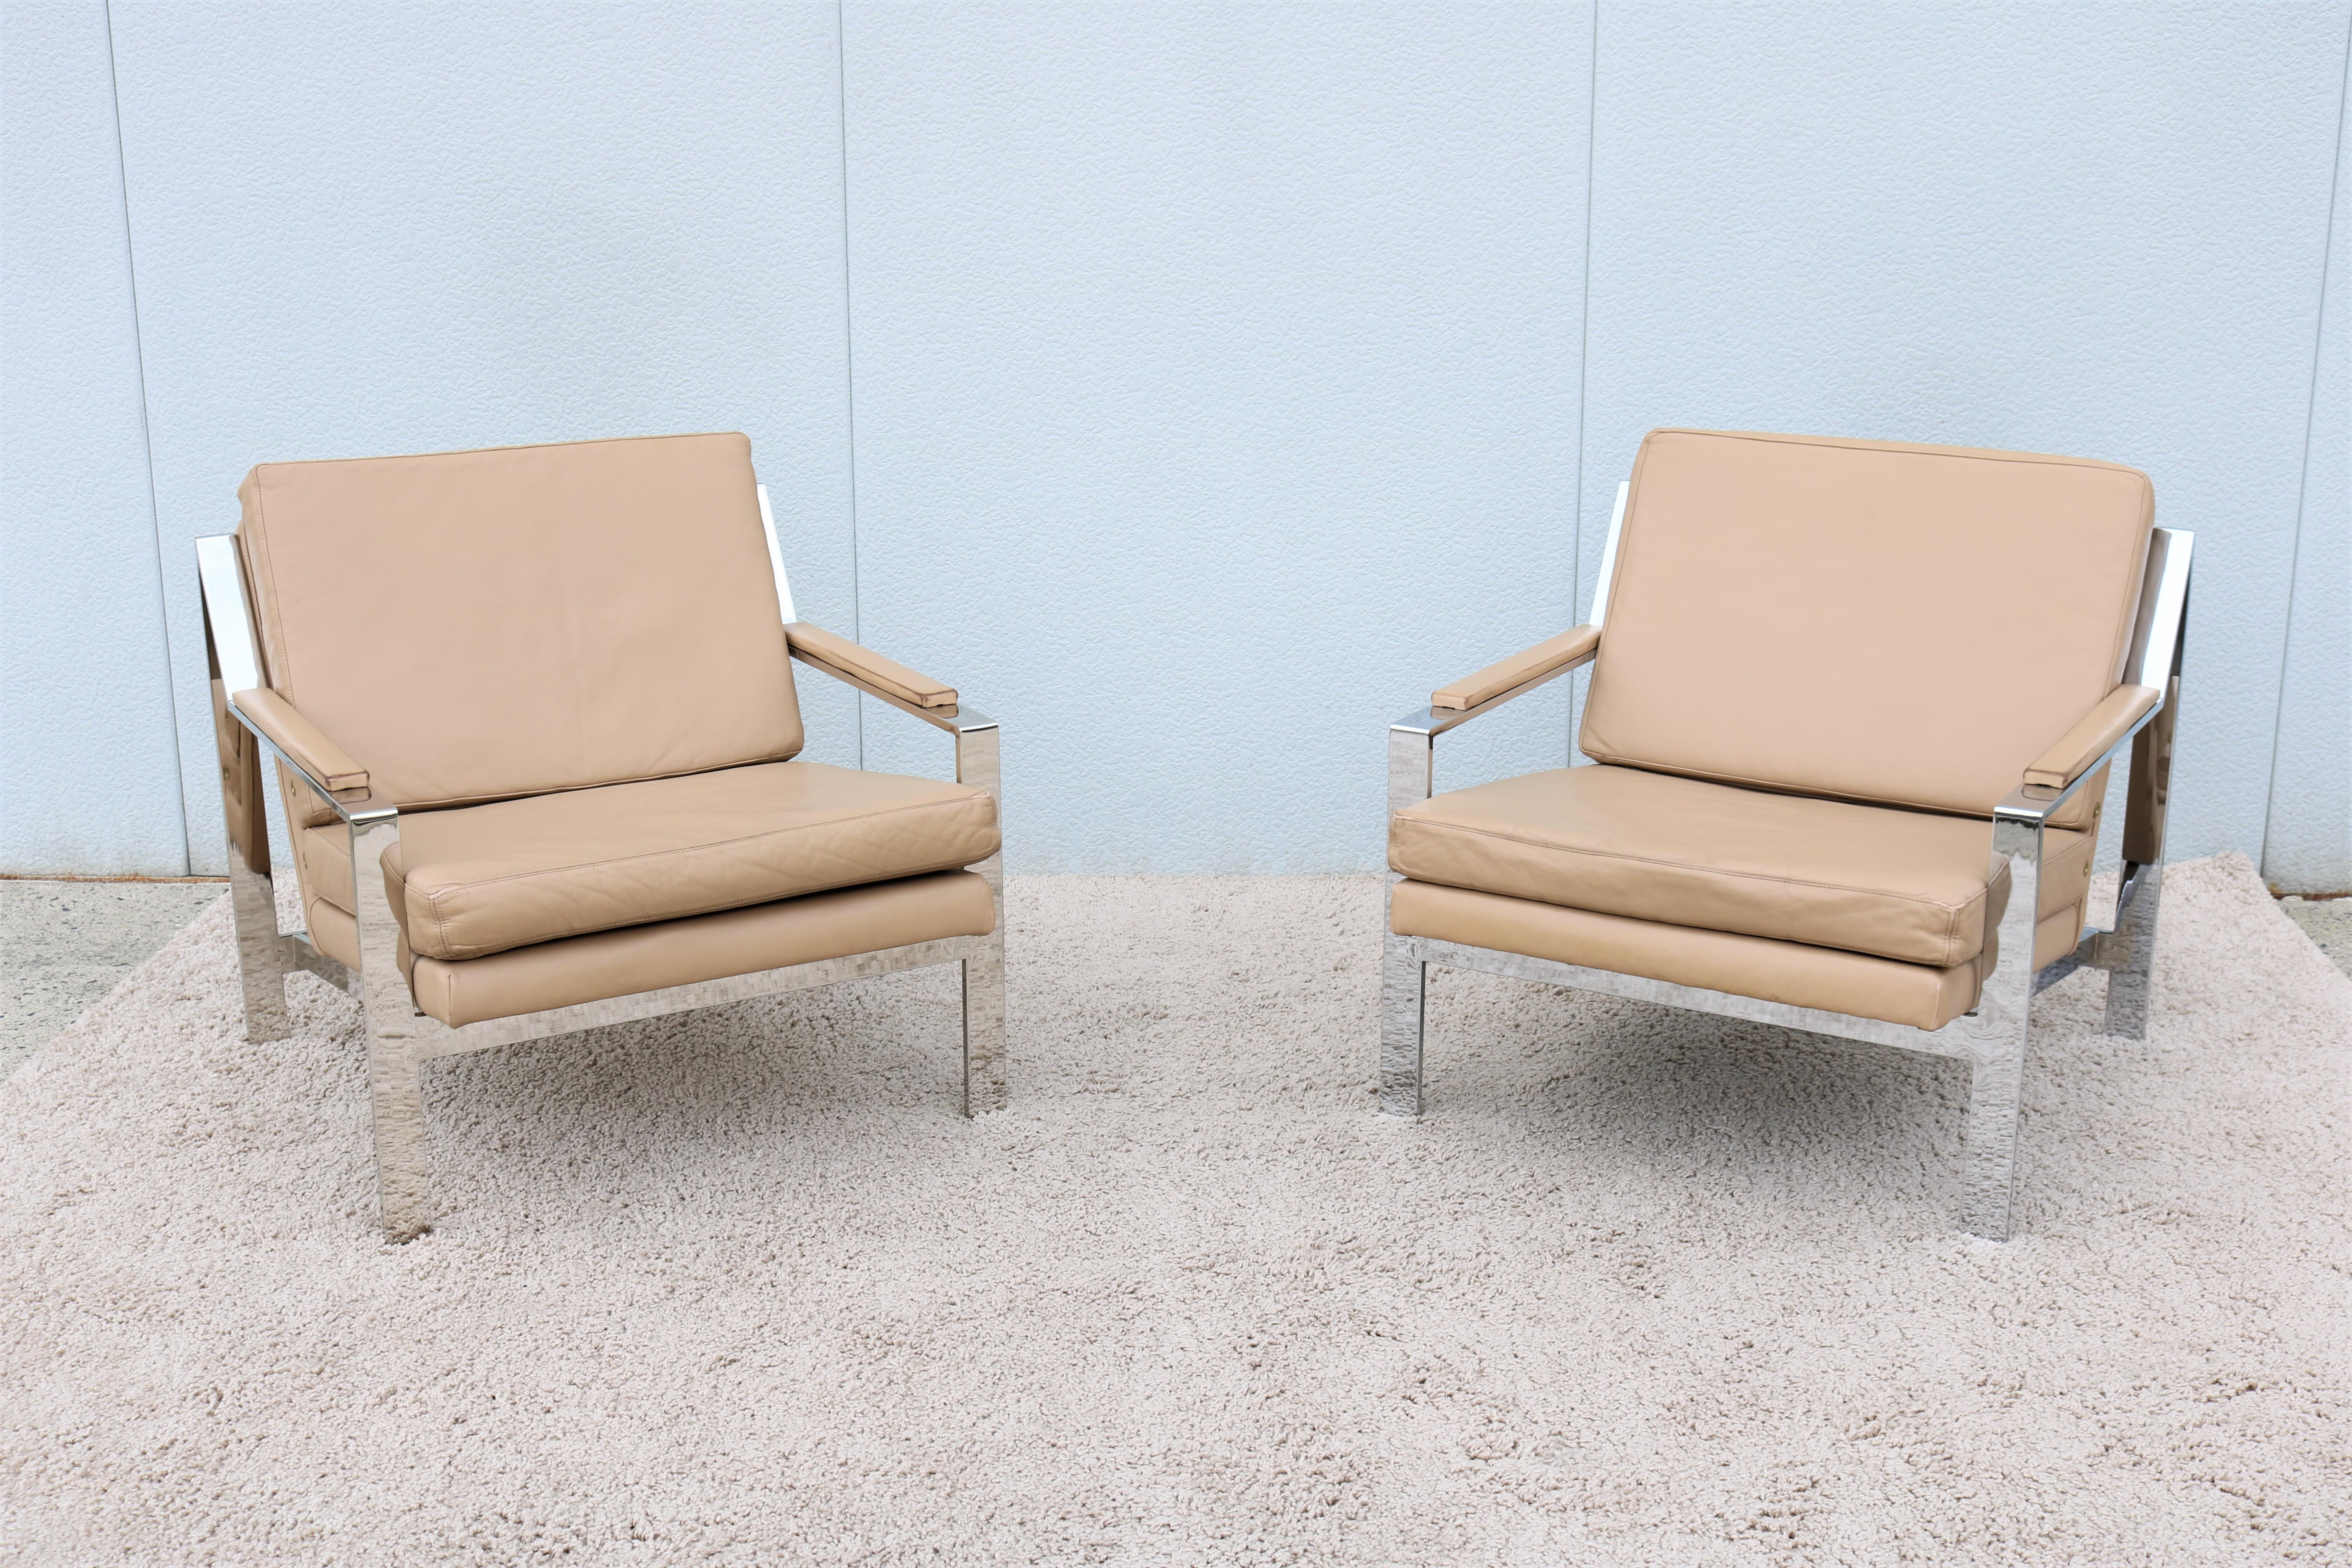 American Vintage Cy Mann Leather and Chrome Lounge Chairs in Milo Baughman Style, a Pair For Sale